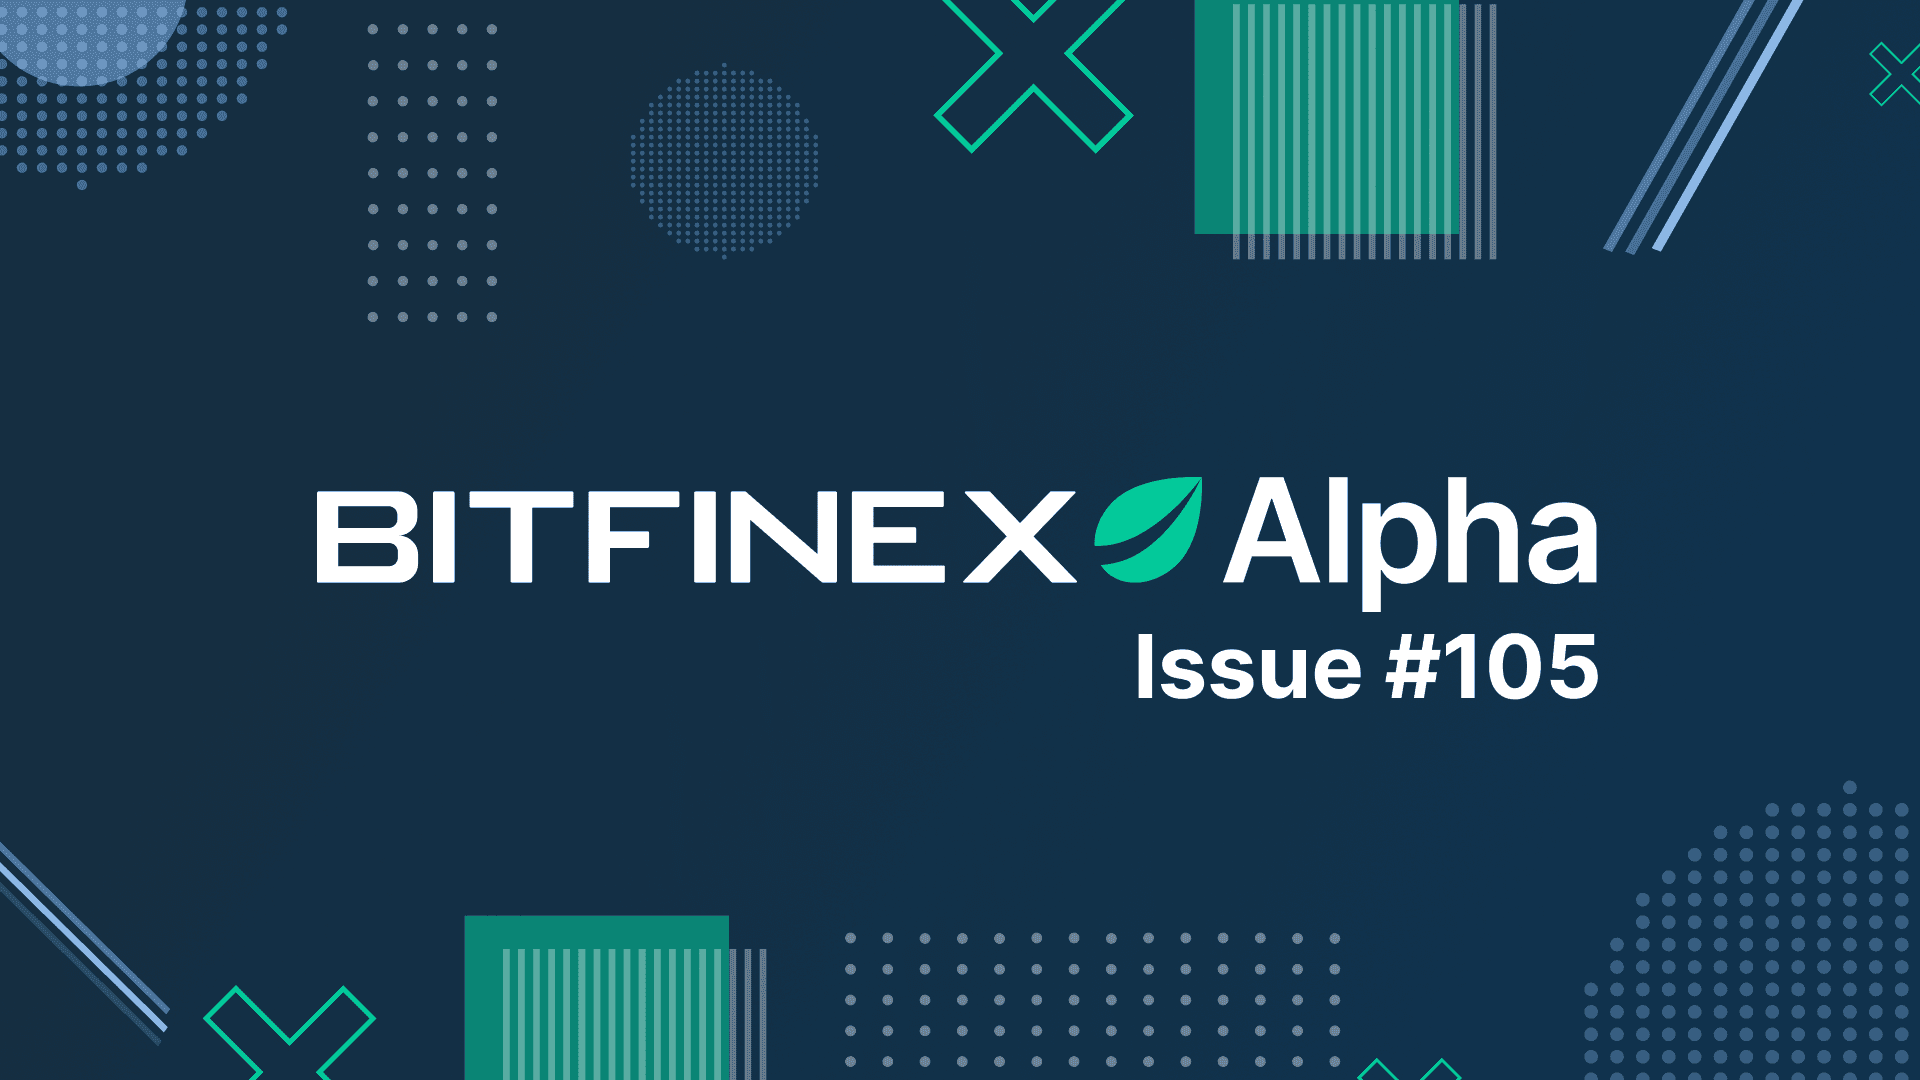 Bitfinex Alpha | Solid Floor Established for Bitcoin, but What Macro Gives It Can Take Away